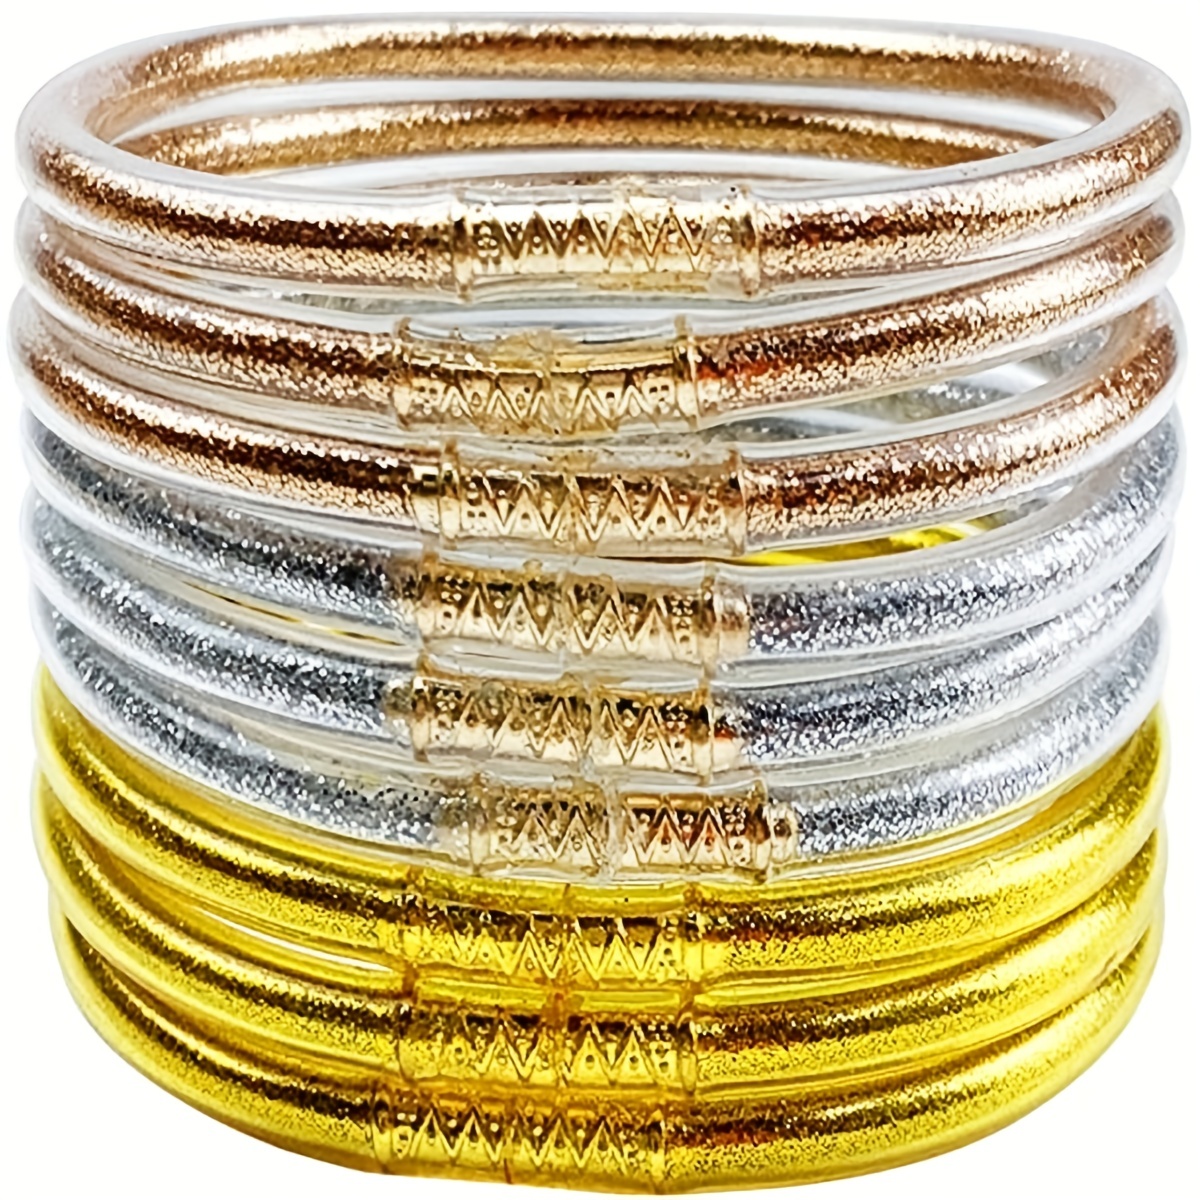 Glitter Plastic Jelly Glitter Bracelets With All Weather Bangles, Filled  With Silicone And Bowknot Jelly Perfect For Summer Fun! From Fashion12358,  $3.15